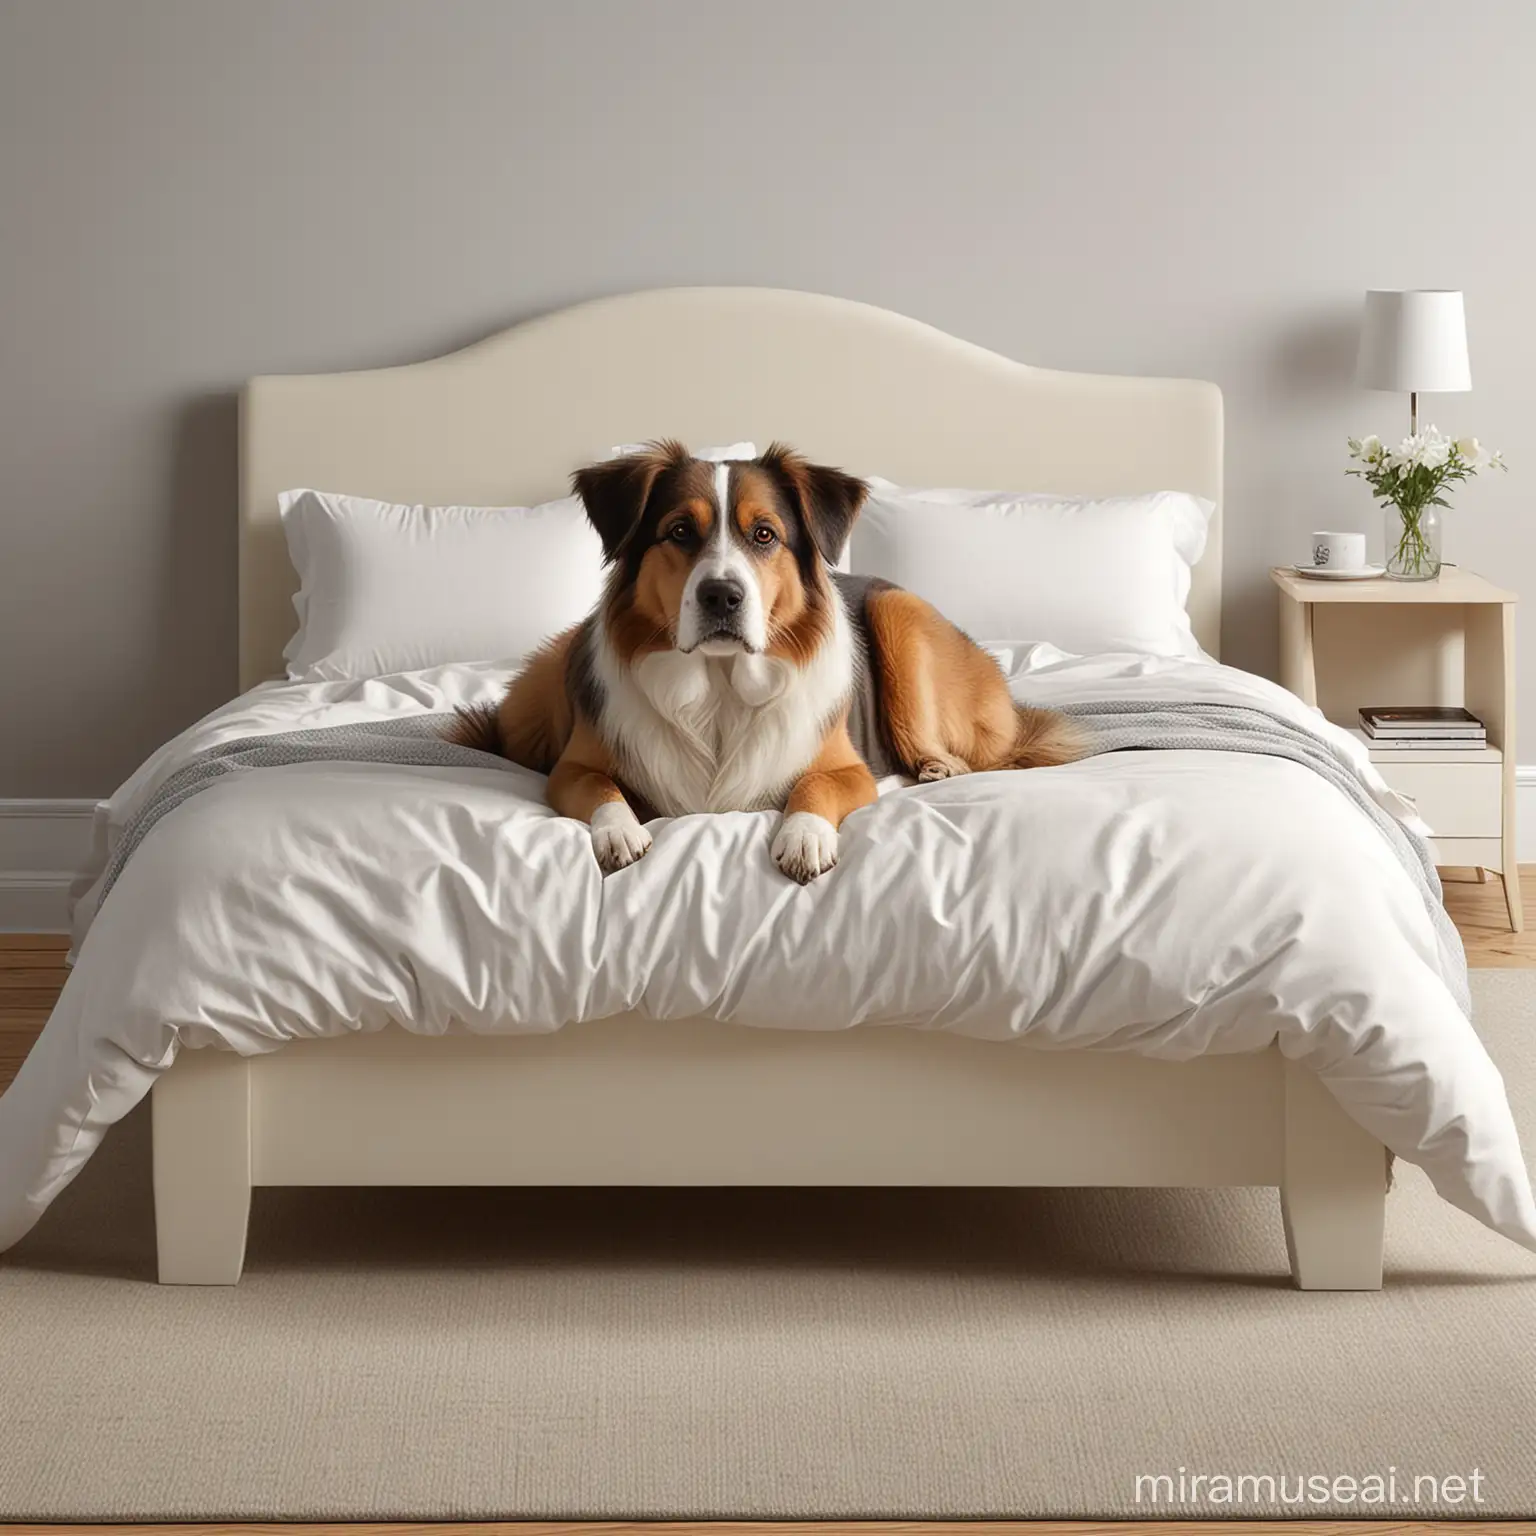 create a realistic photo of a bed that looks like a dog
